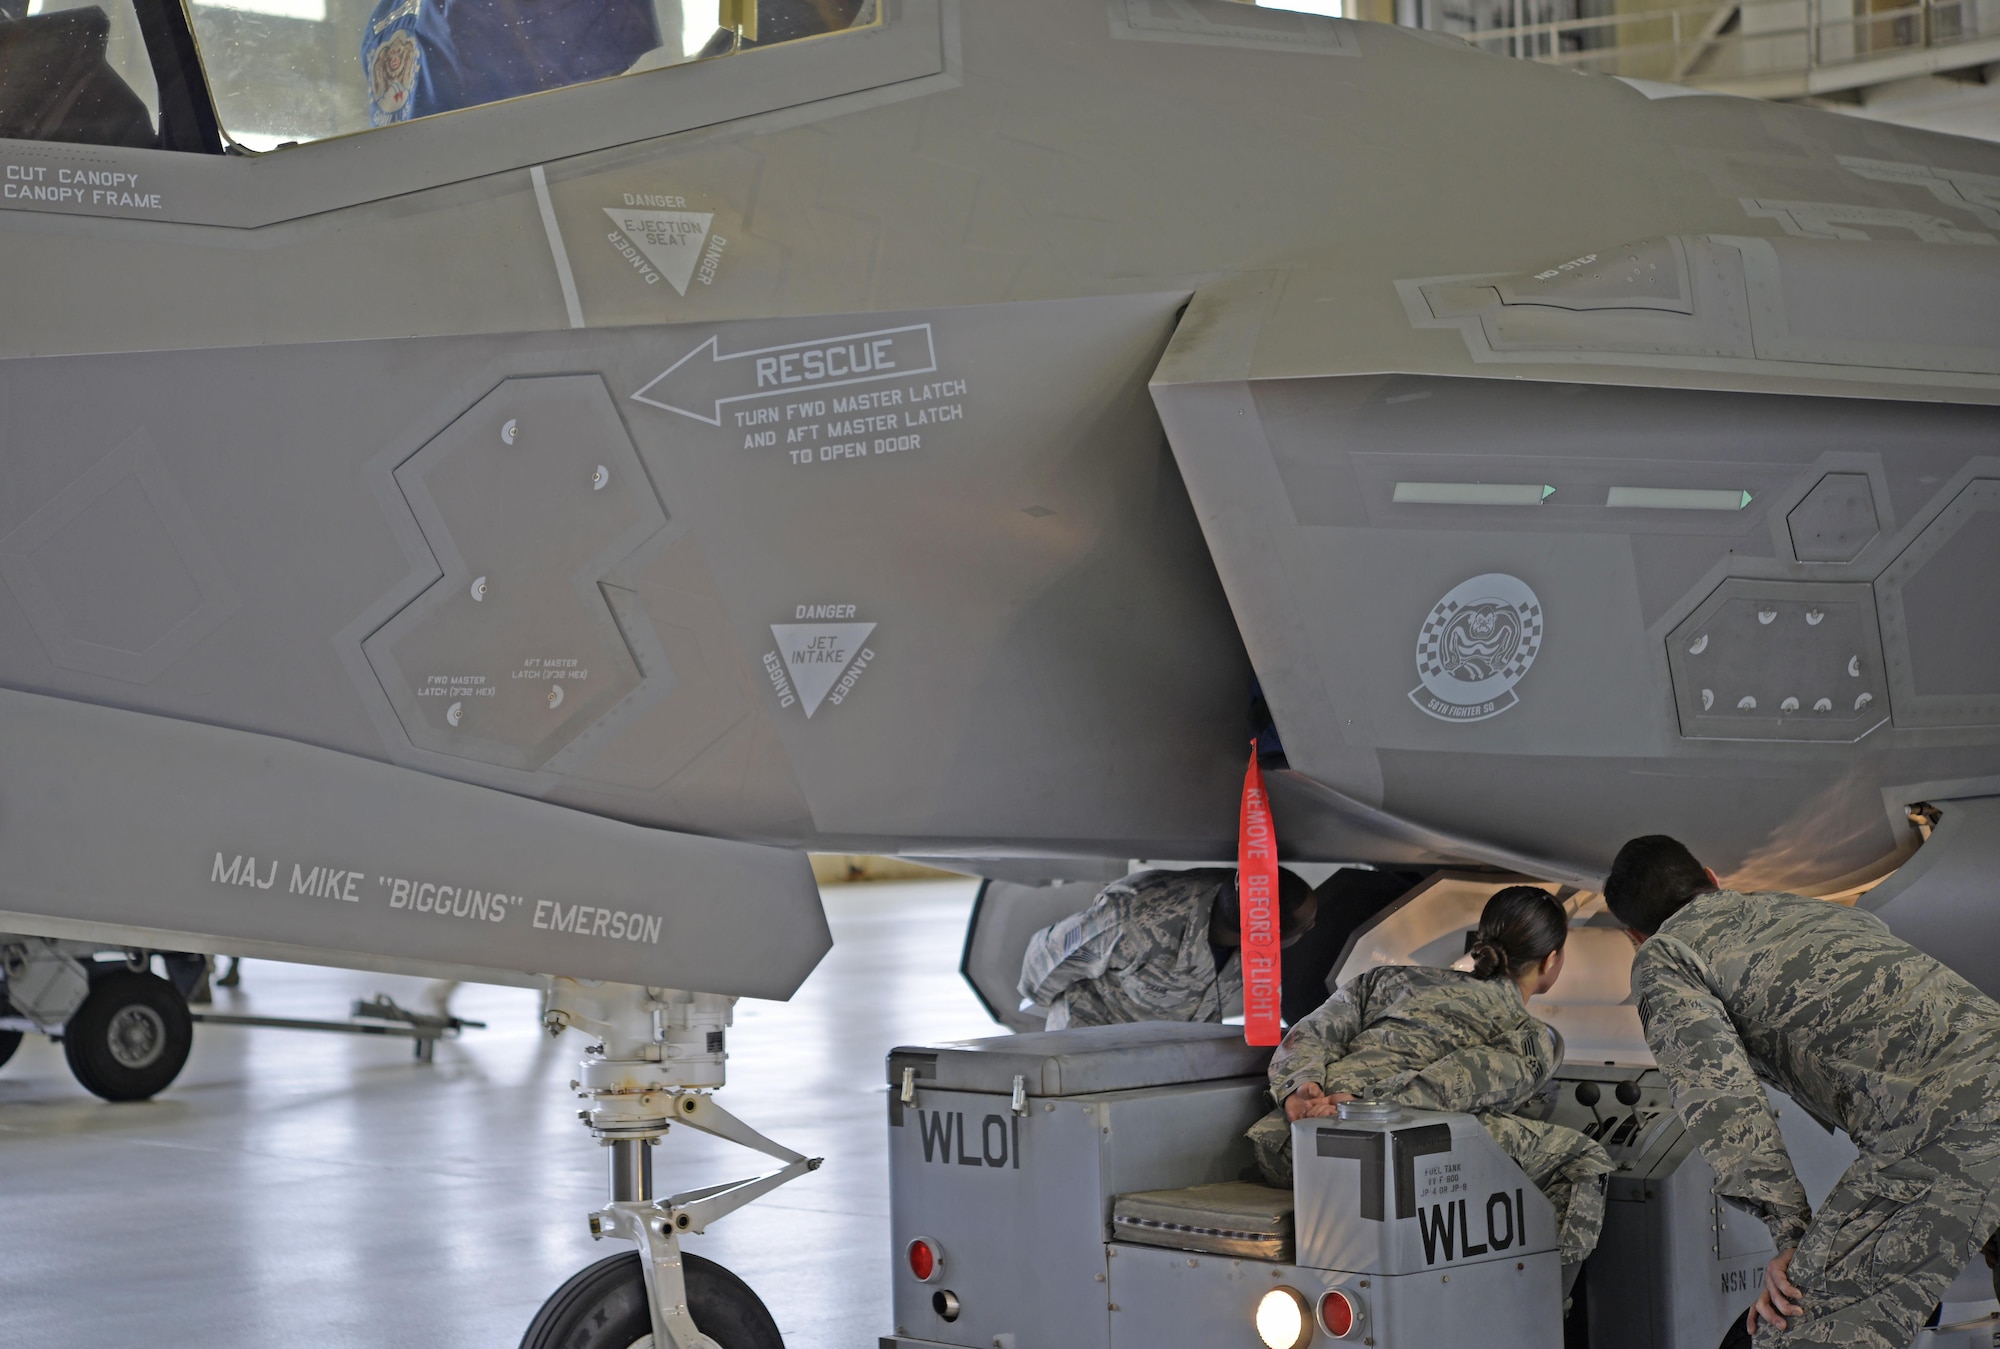 Load crew members from the 33rd Fighter Wing and judges watch as a weapon is loaded into an F-35A Lightning II during a weapons load competition at Eglin Air Force Base, Fla., March 18, 2016. This was the first weapons load competition here to face the 33rd FW and the 96th Test Wing against each other as they loaded weapons onto the F-35, F-15 Eagle and F-16 Fighting Falcon. During this competition load crew teams were evaluated on the level of safety, efficiency and speed demonstrated while loading munitions. (U.S. Air Force photo/Staff Sgt. Tarelle Walker)